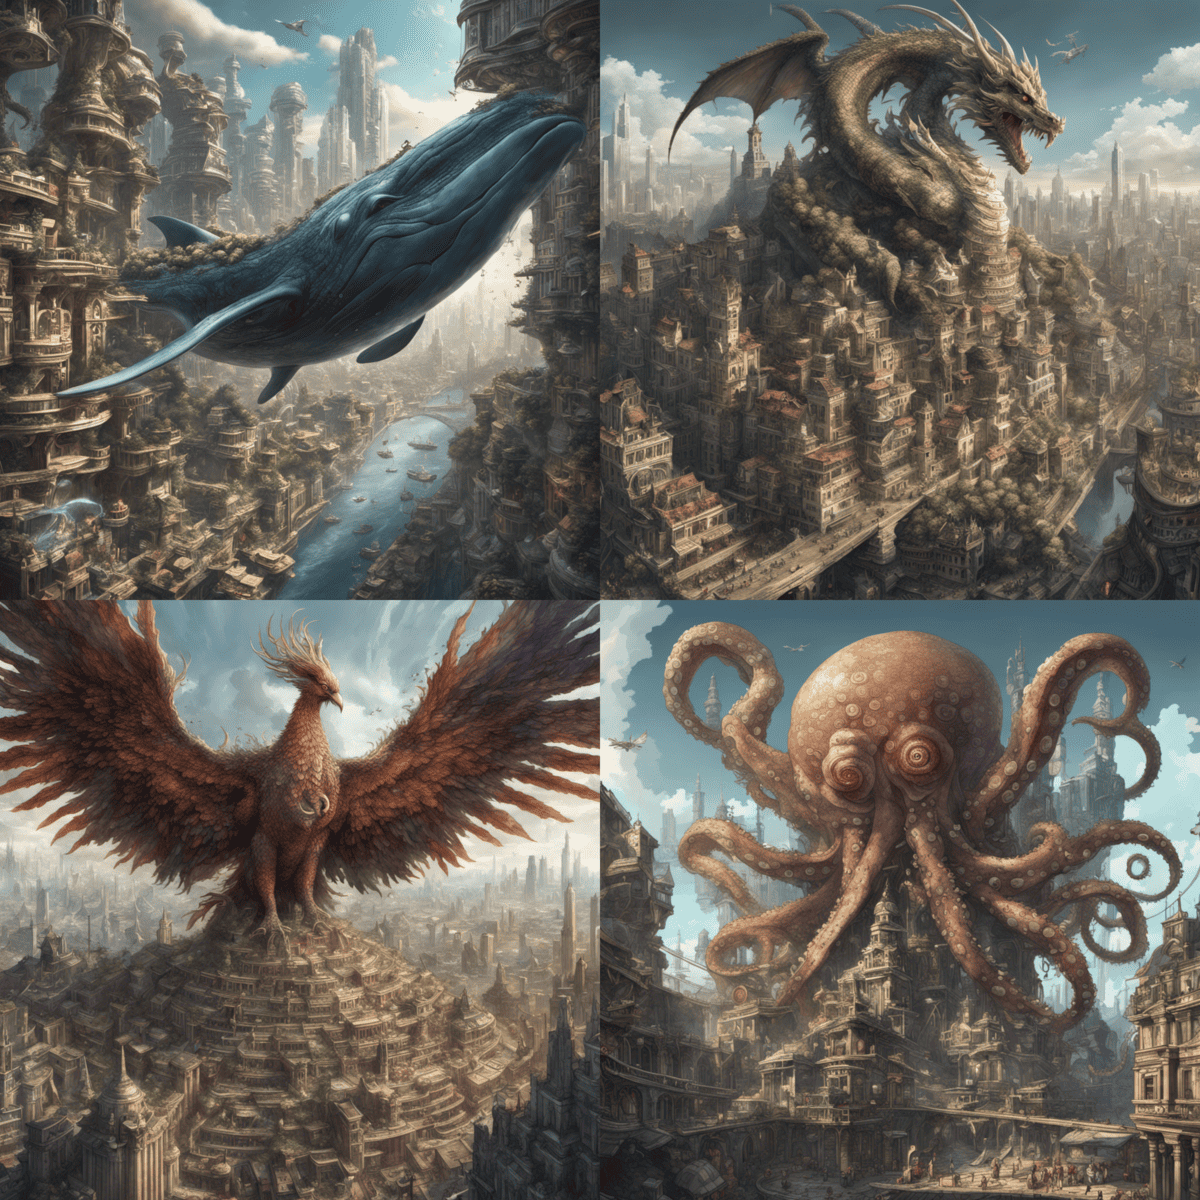 Giant creatures and city